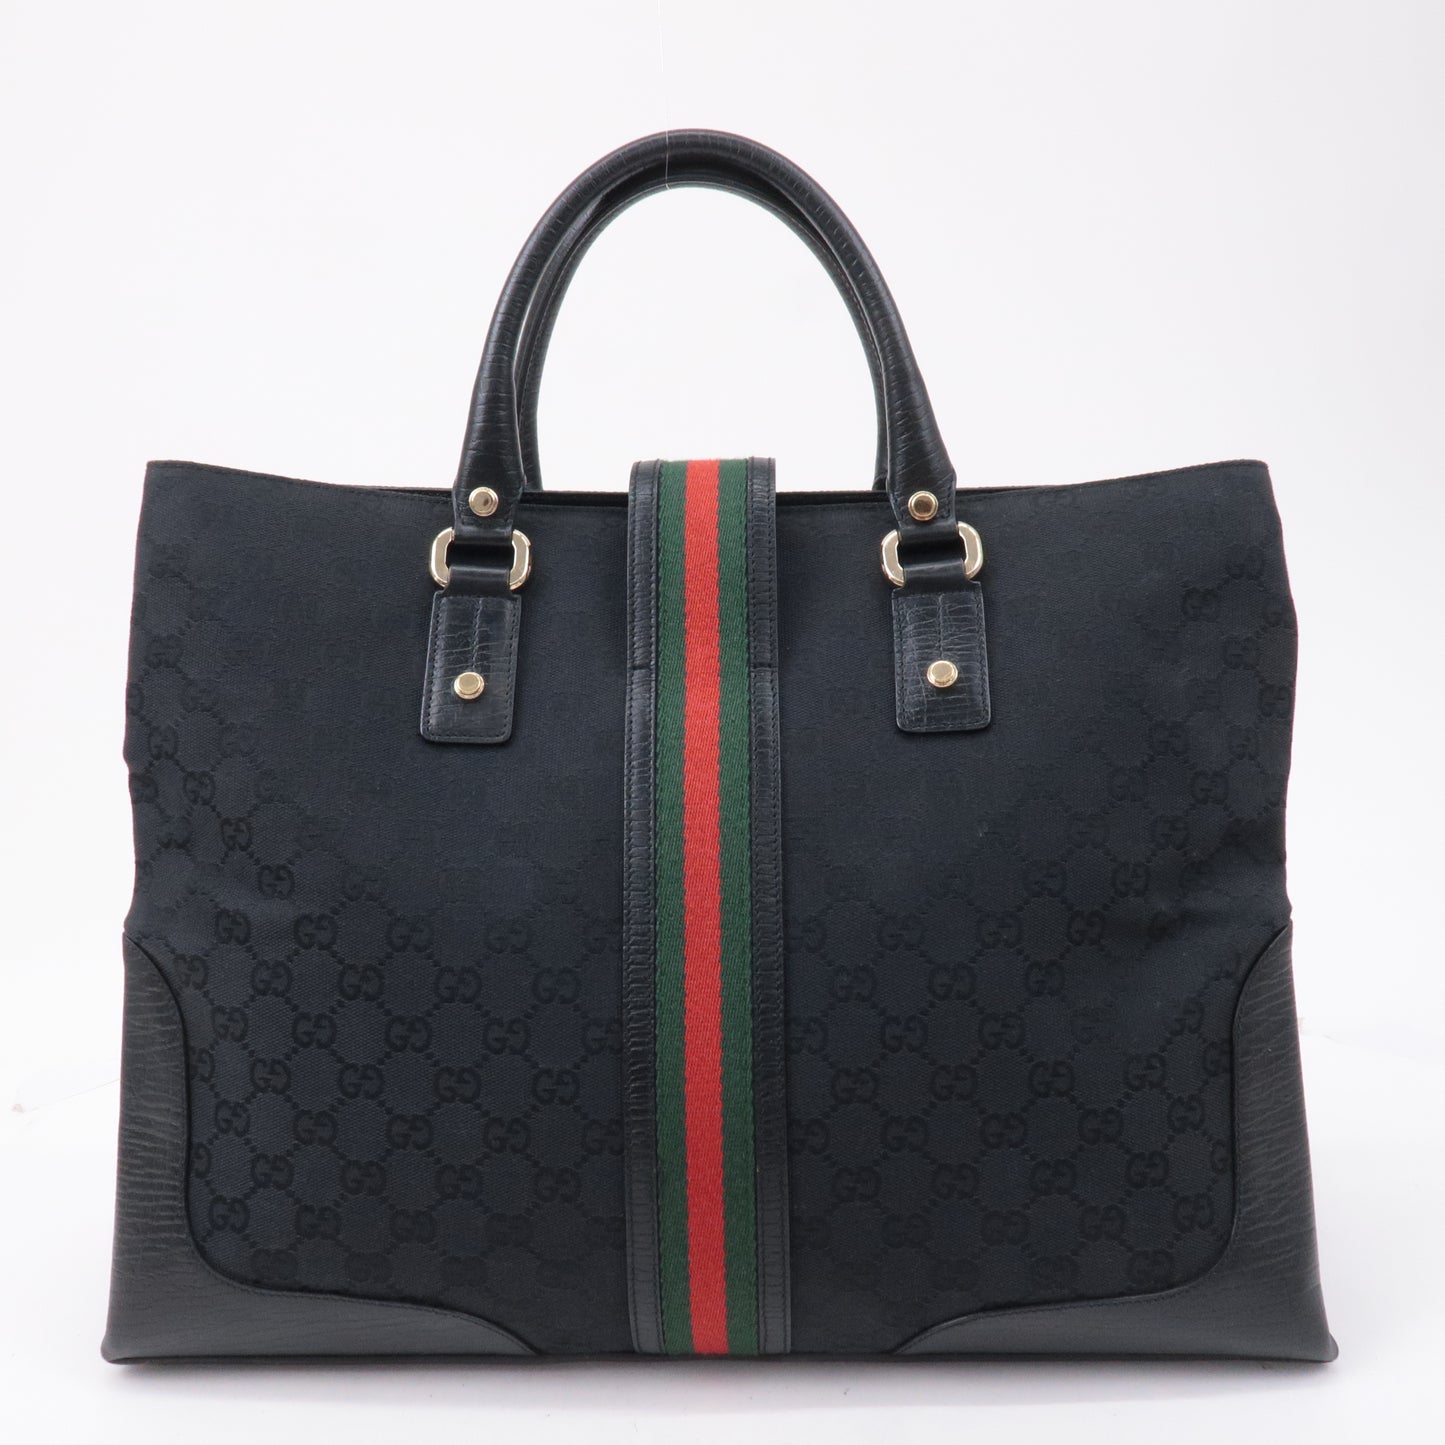 GUCCI Sherry GG Canvas Leather Tote Bag Black 130994